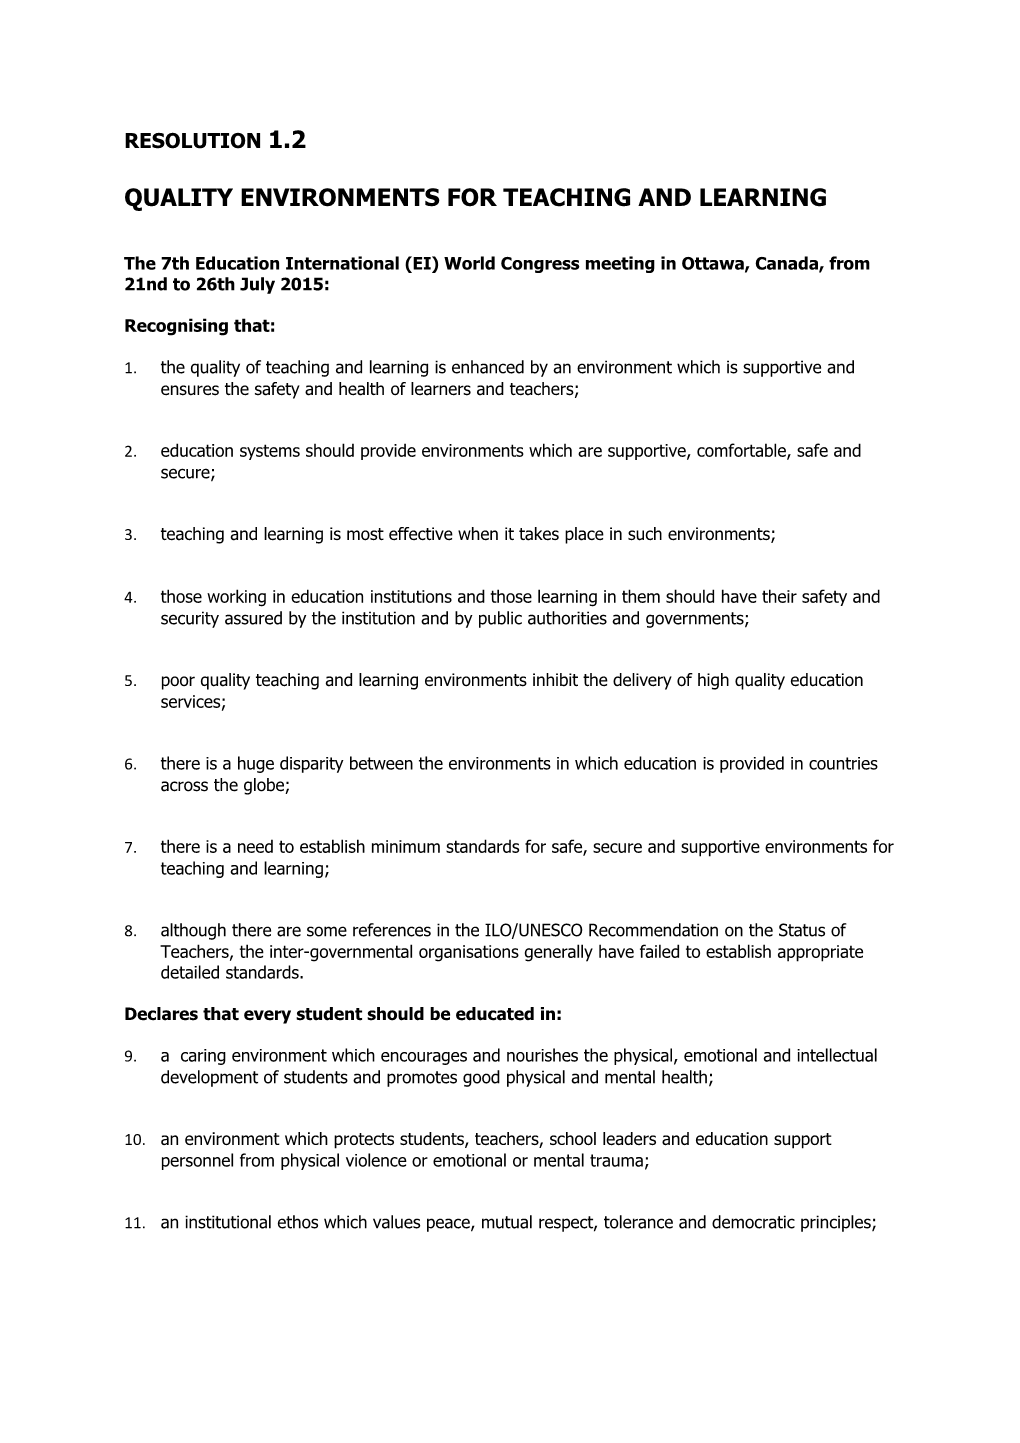 7WC Resolution: Quality Environments for Teaching and Learning